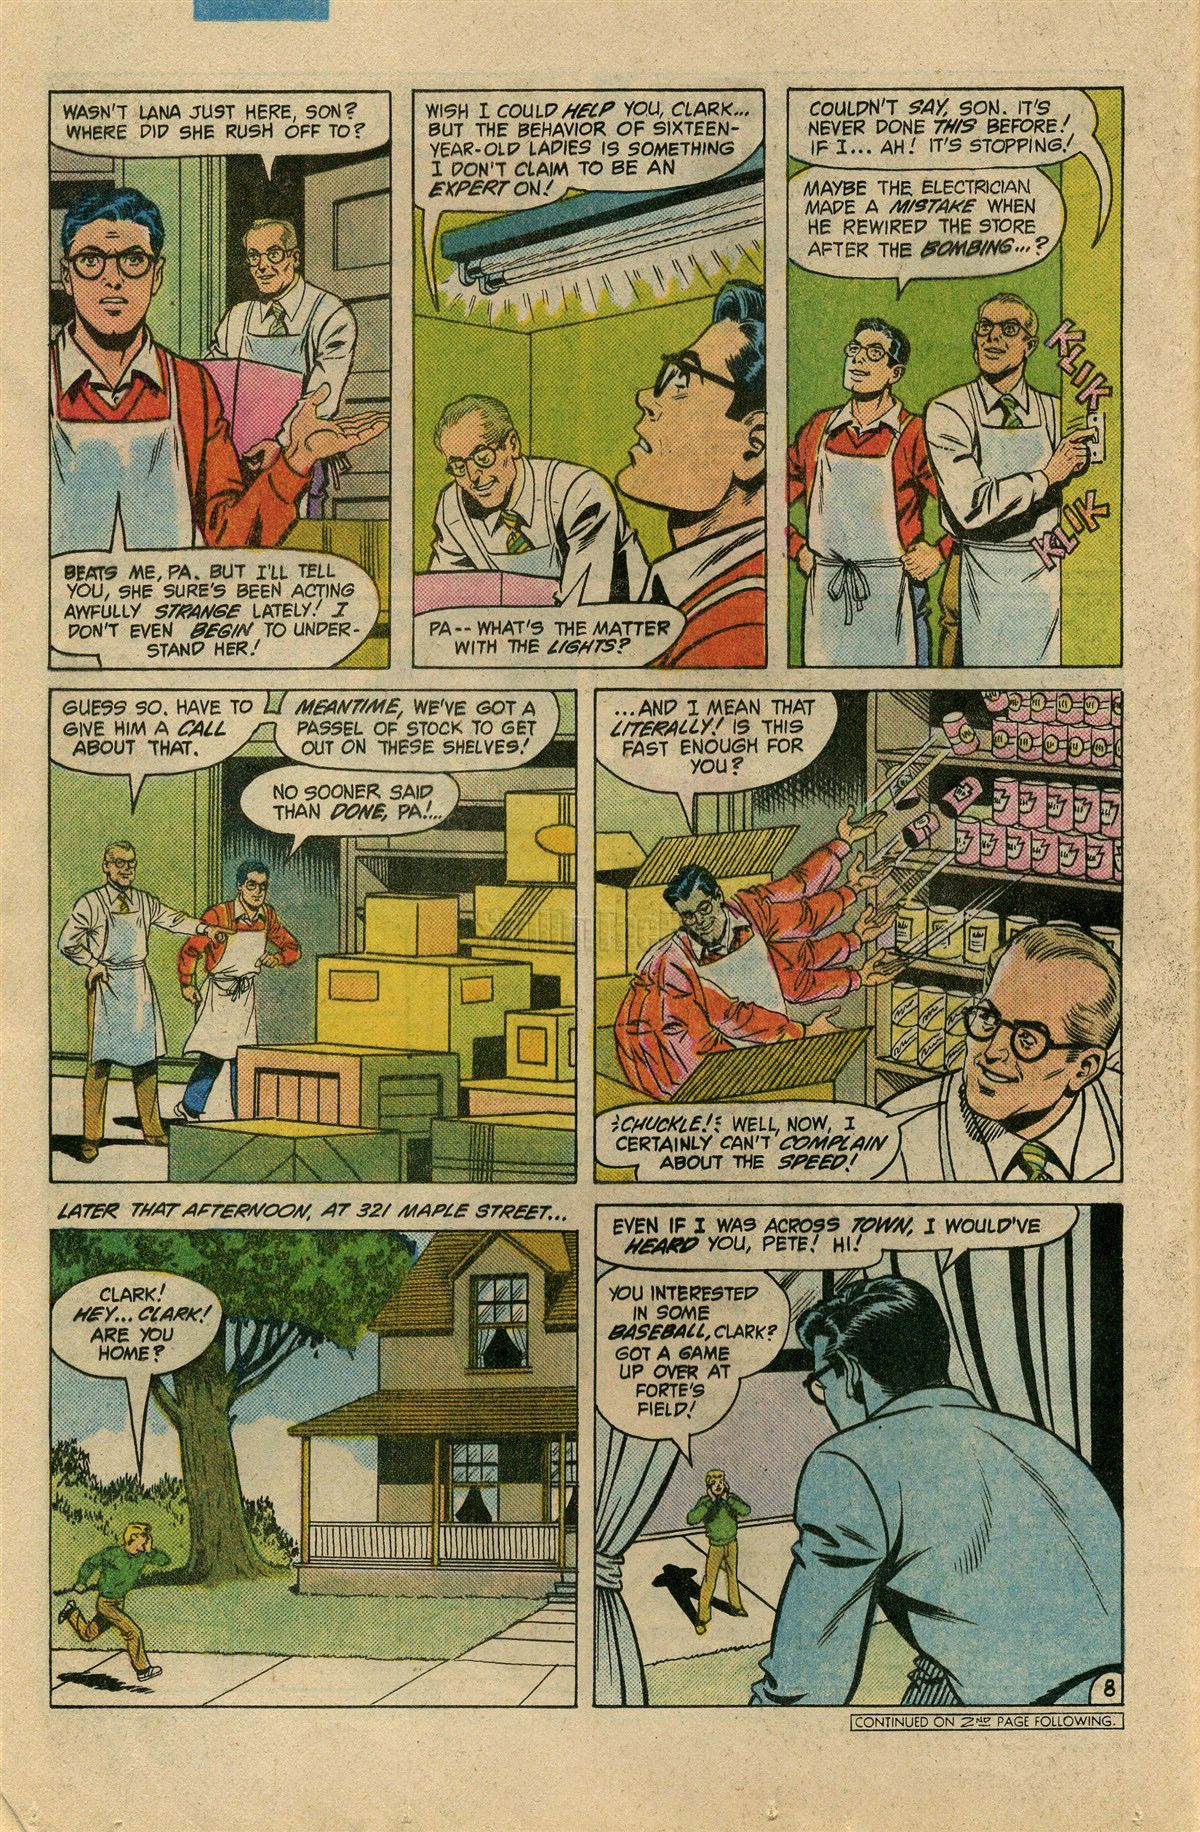 The New Adventures of Superboy 52 Page 10